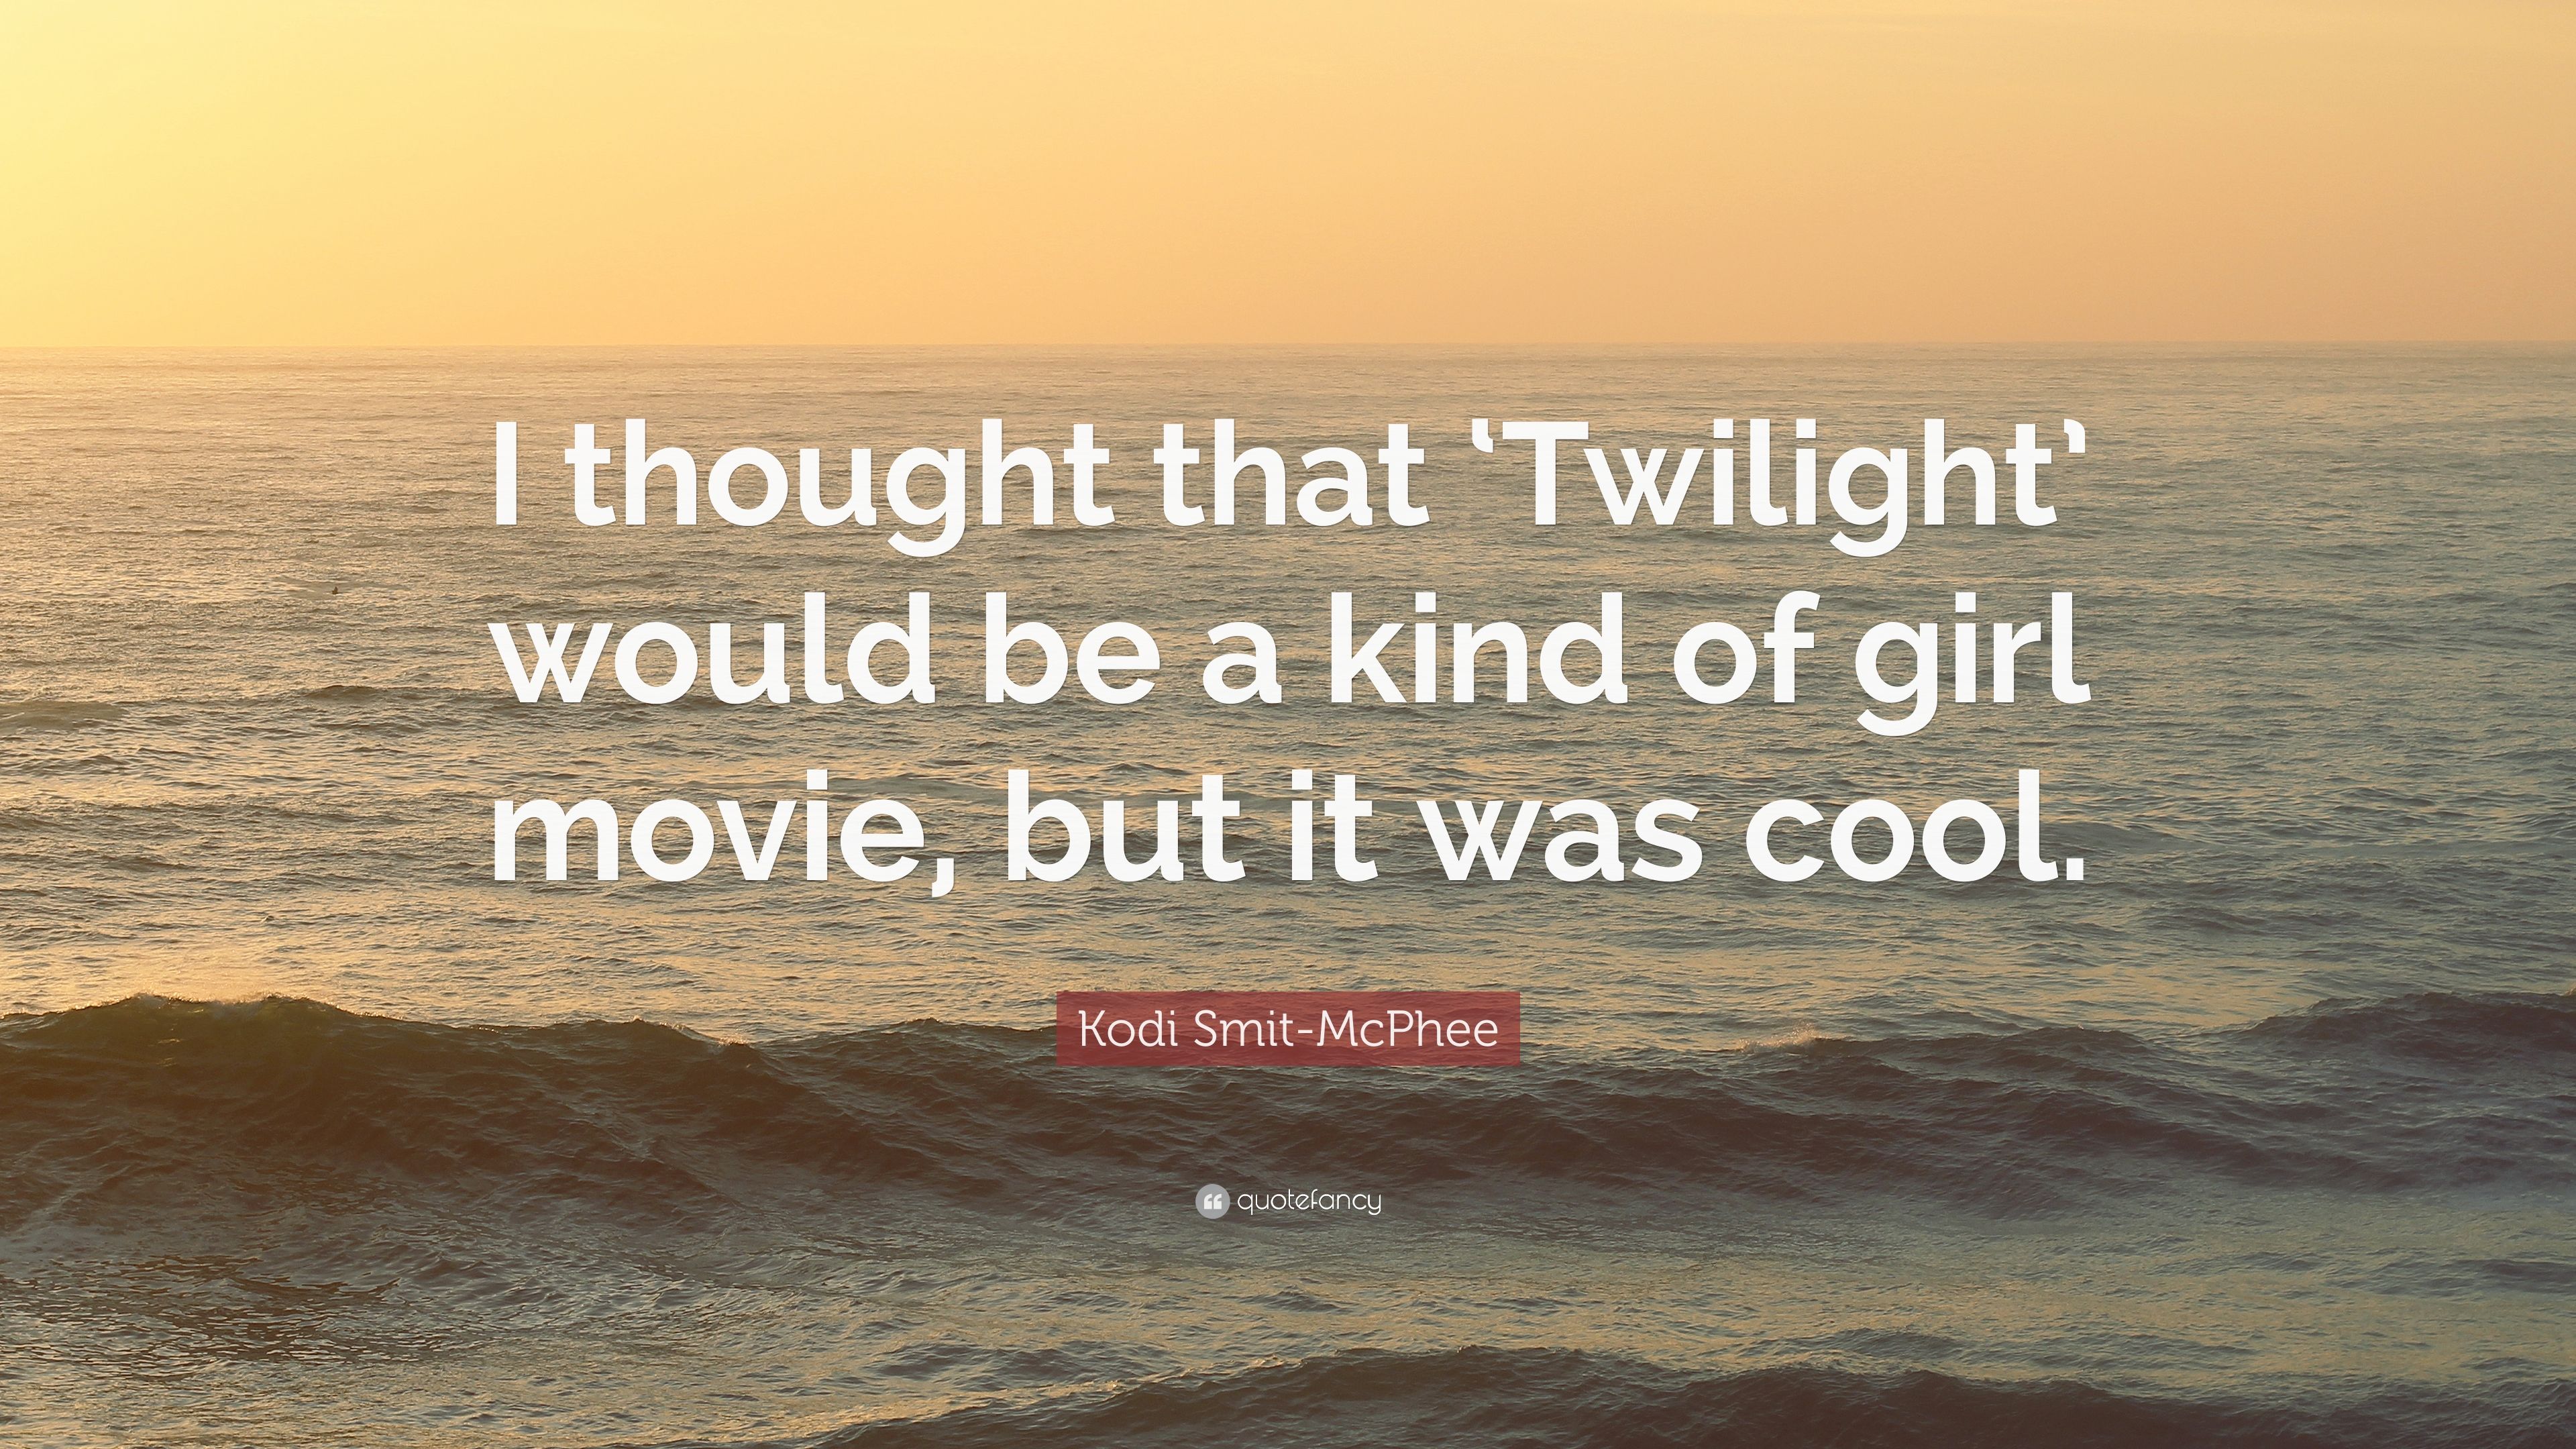 Kodi Smit McPhee Quote: “I Thought That 'Twilight' Would Be A Kind